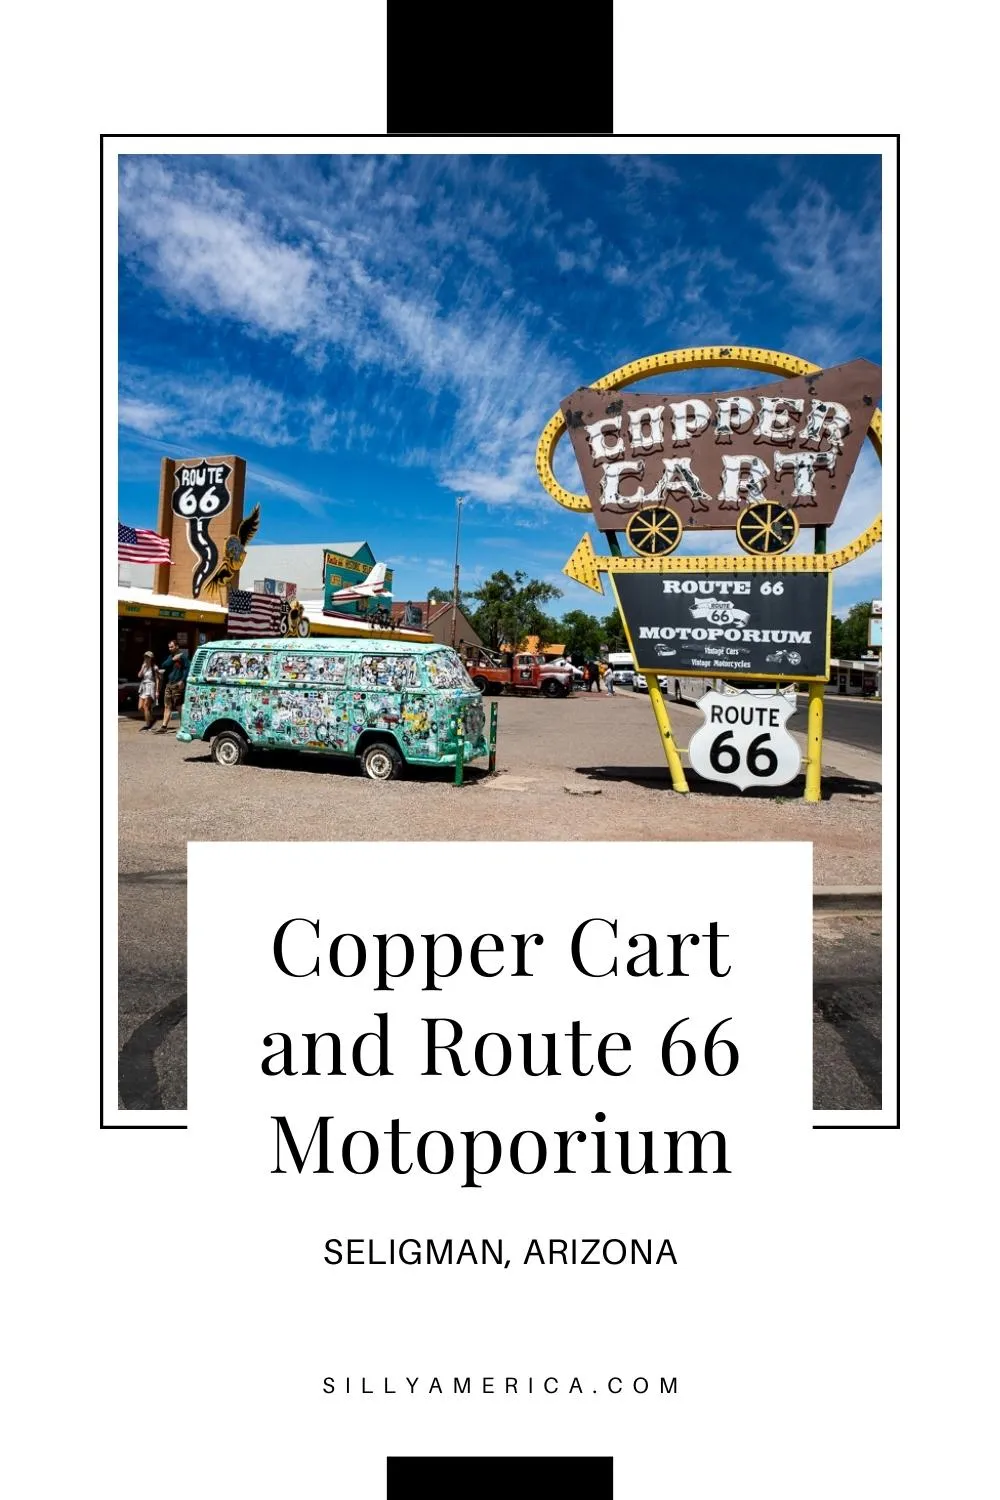 Known for its iconic neon sign and great Mexican food, the Copper Cart in Seligman, Arizona was once one of the most popular Route 66 restaurants in town. You can no longer get food at this establishment, but you can still come inside. The building is now home to the Route 66 Motoporium. The Route 66 museum features motorcycles and other vintage cars - both inside and out! Add this roadside attraction to your Route 66 road trip itinerary! #Route66 #Route66RoadTrip #RoadsideAttraction #Arizona